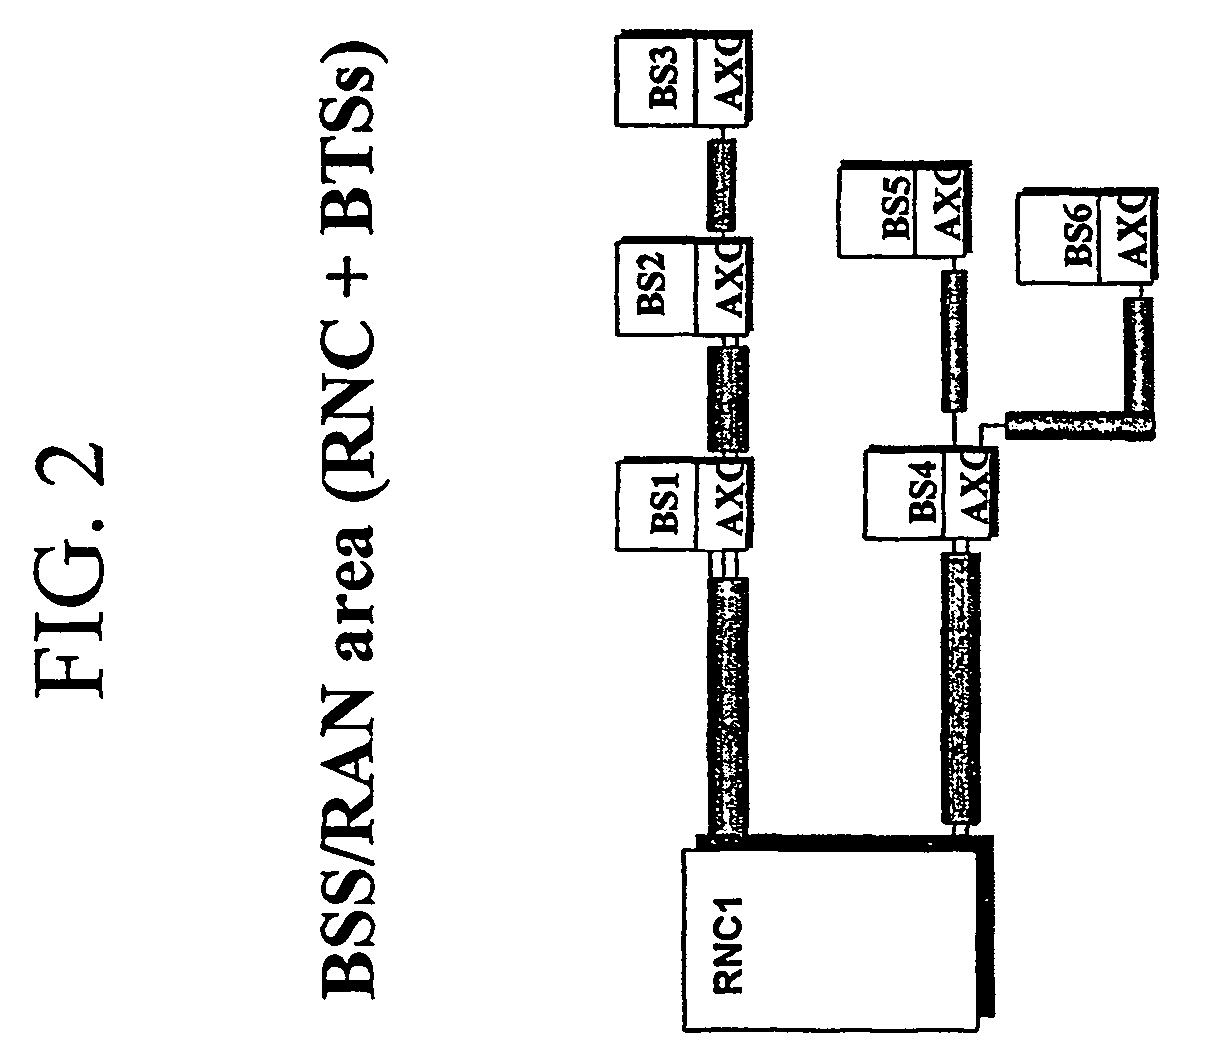 Configuring a data transmission interface in a communication network